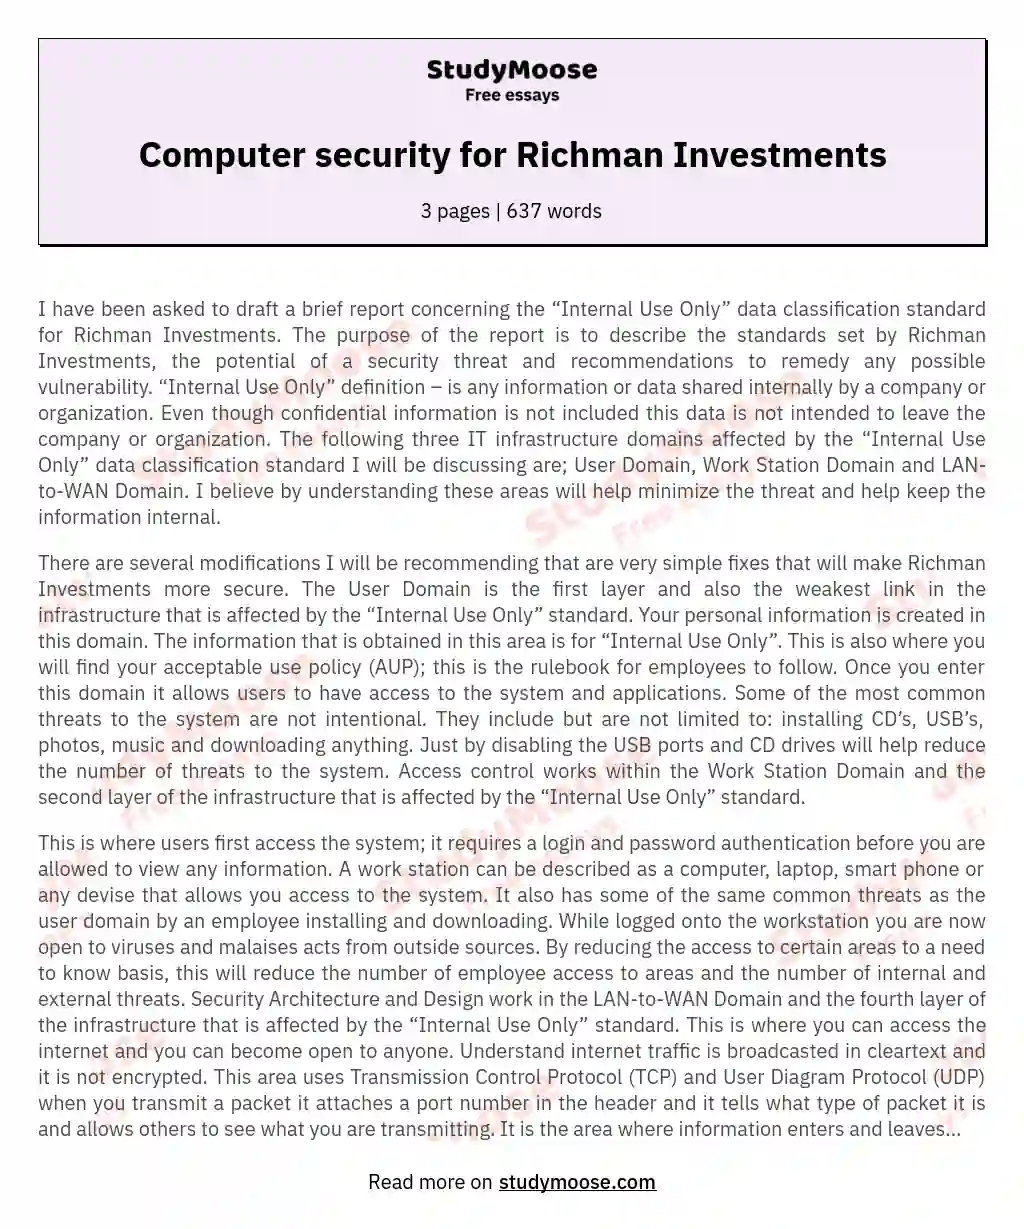 Computer security for Richman Investments essay